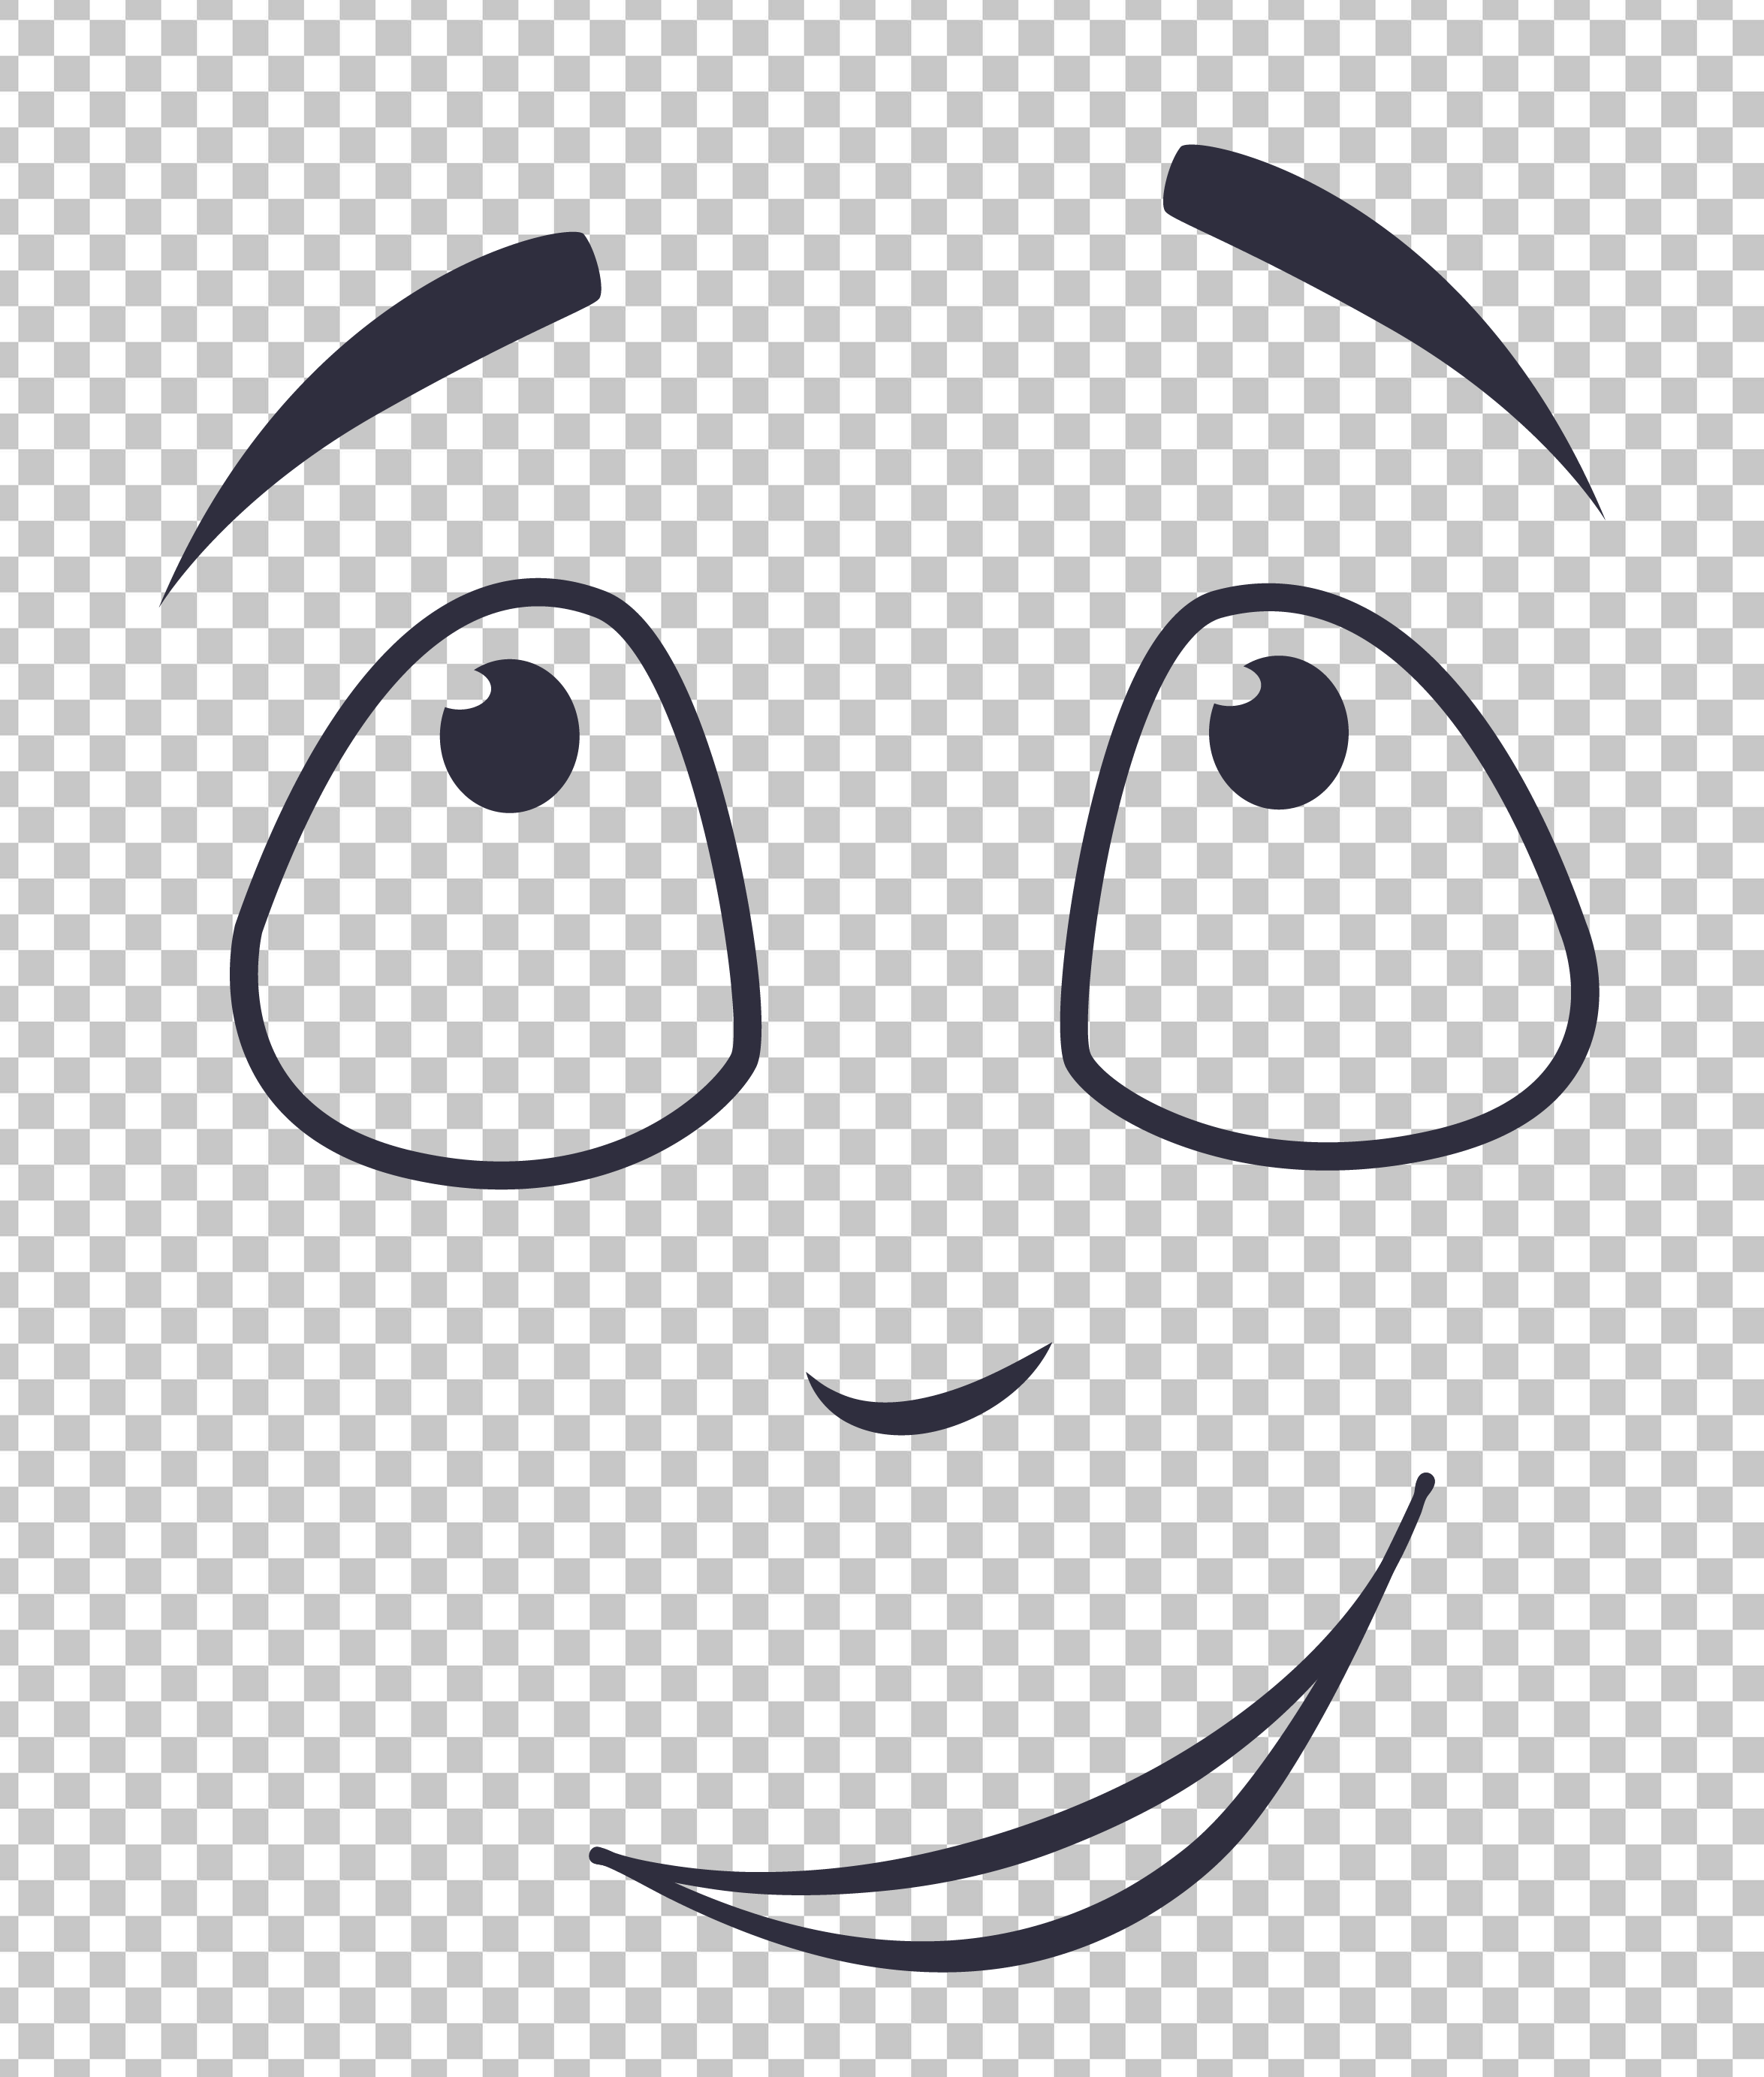 Imagining something with smiling Expression PNG Image